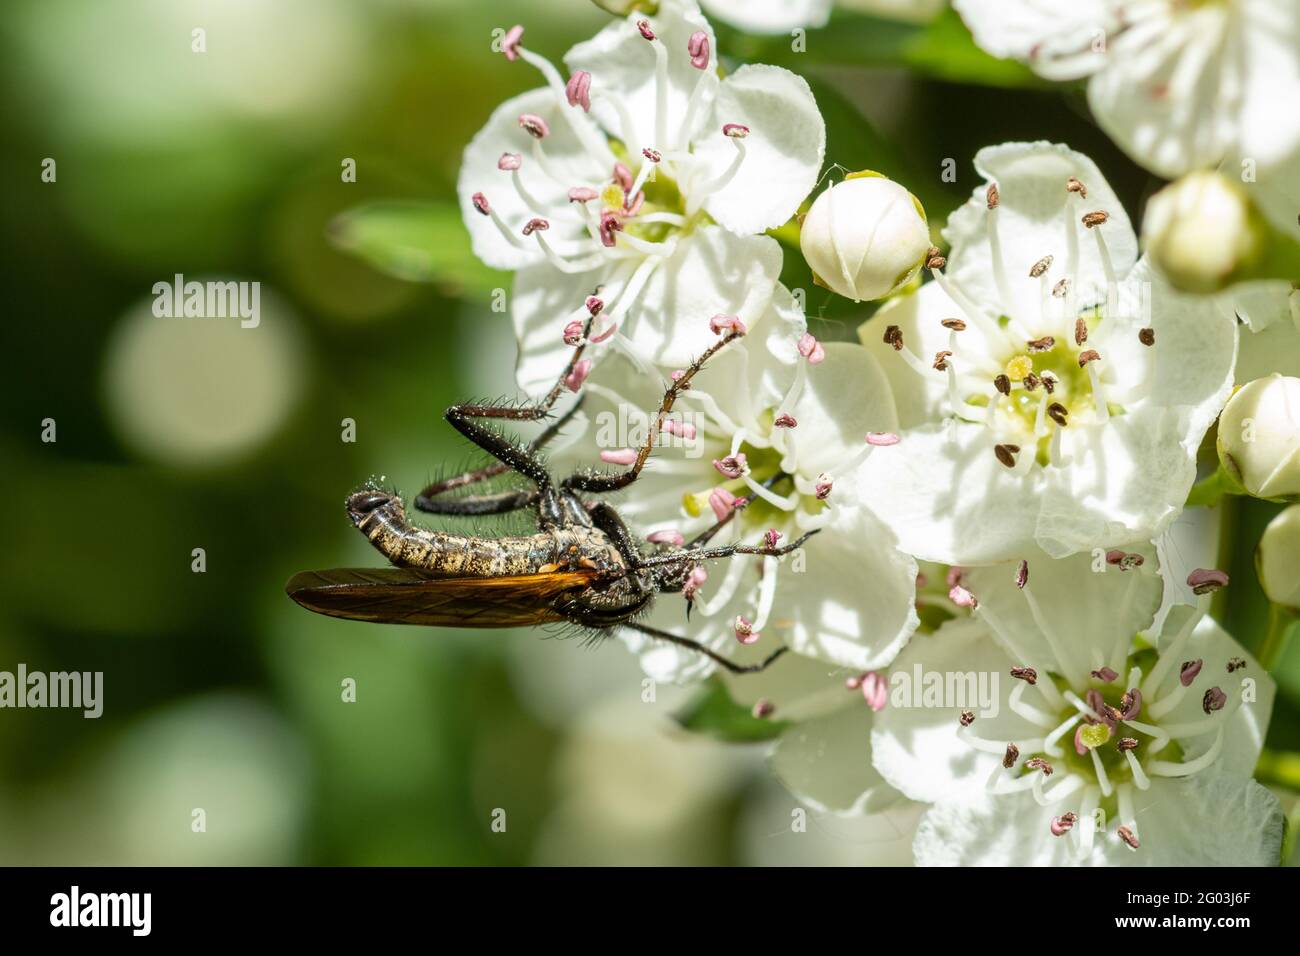 Bibio marci, also called St Mark's fly or Hawthorn fly, drinking nectar from hawthorn flowers, UK, during May Stock Photo